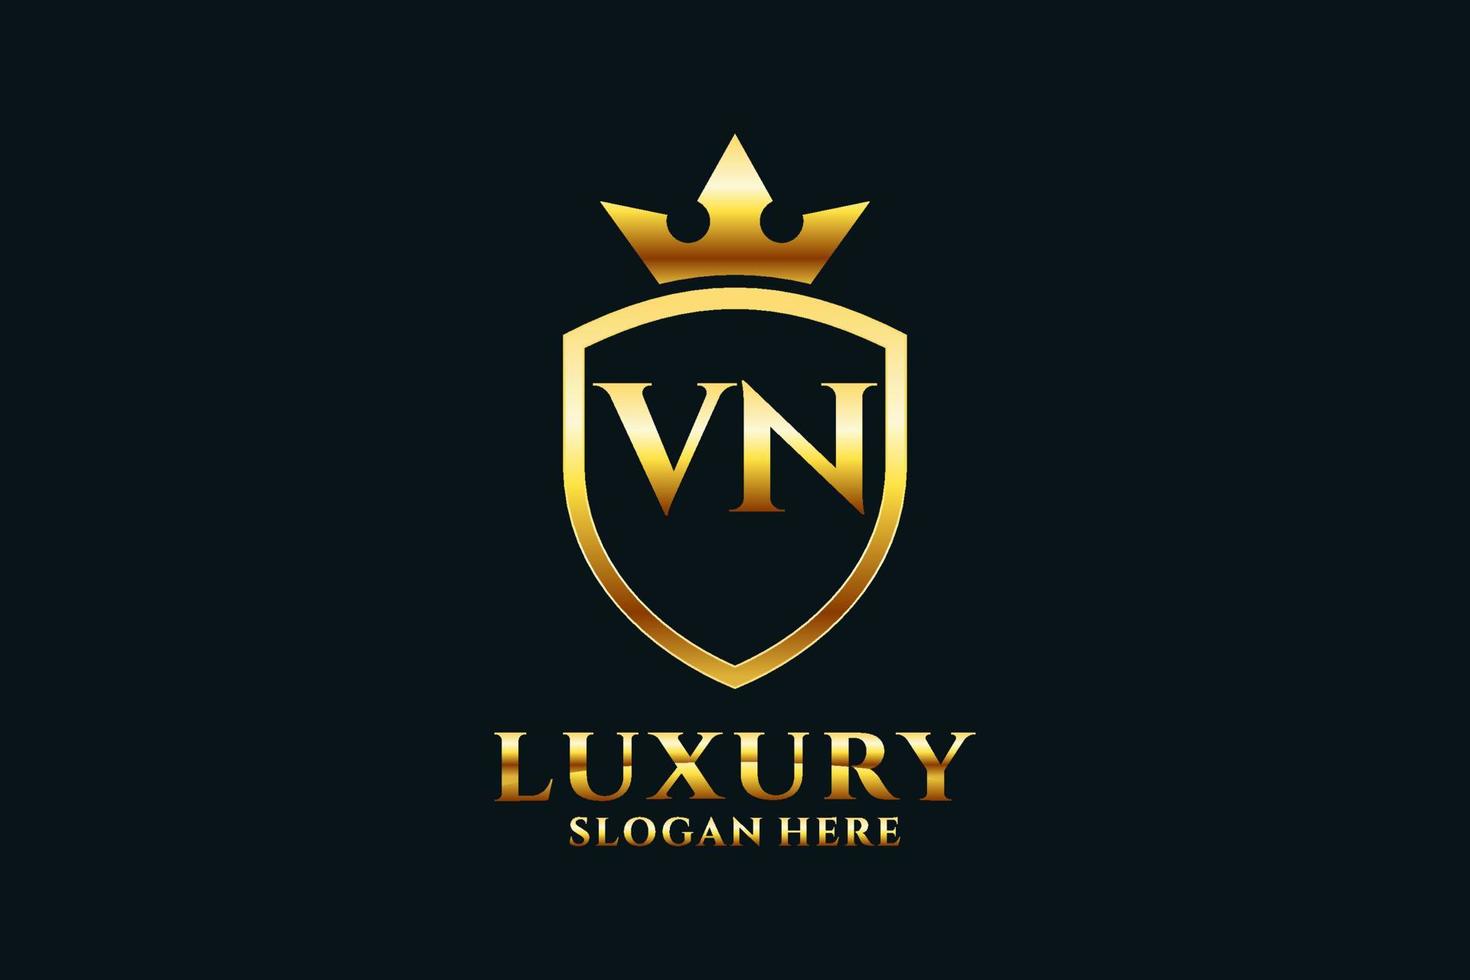 initial VN elegant luxury monogram logo or badge template with scrolls and royal crown - perfect for luxurious branding projects vector